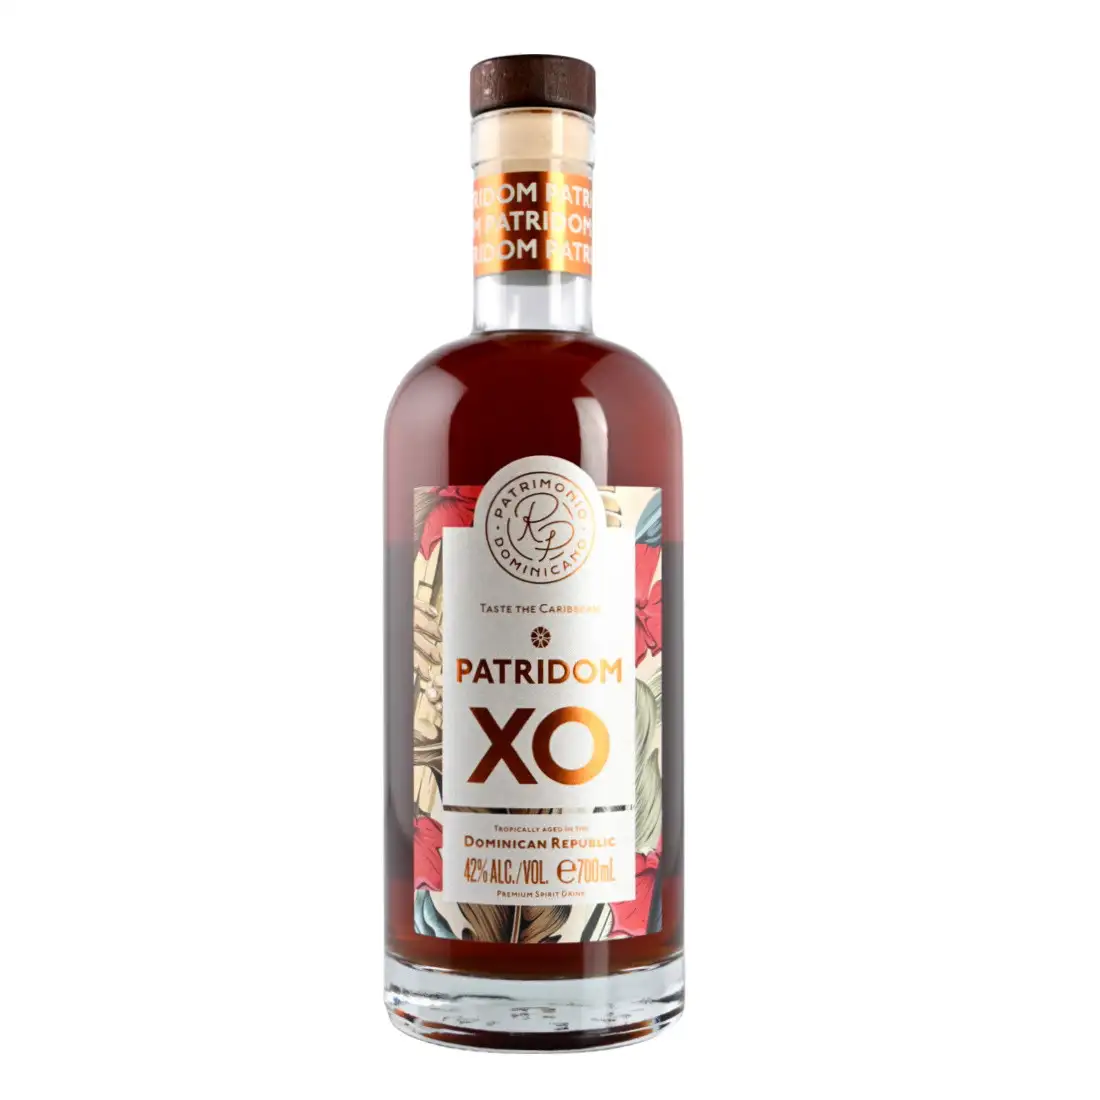 Image of the front of the bottle of the rum Patridom XO